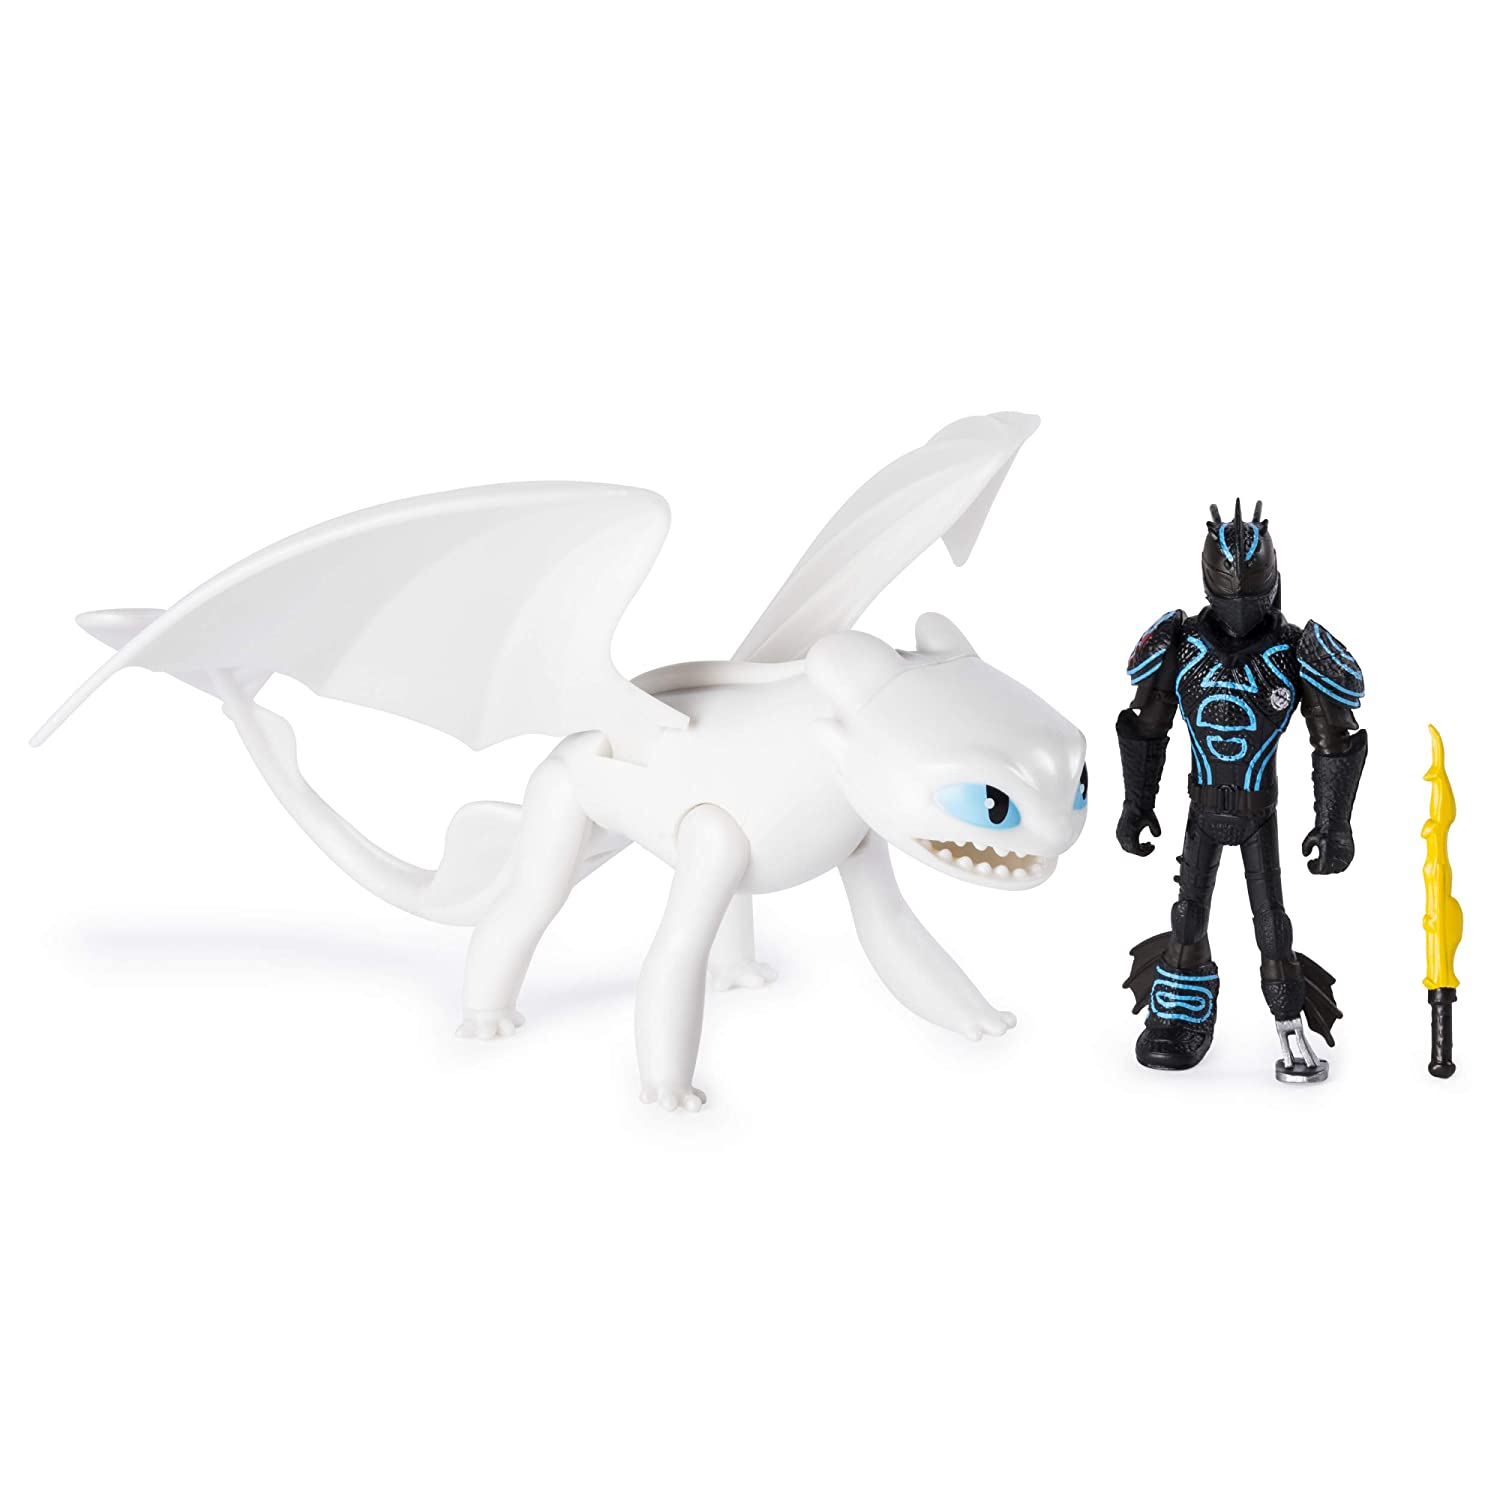 Dreamworks Dragons, Lightfury and Hiccup, Dragon with Armored Viking Figure, for Kids Aged 4 and Up